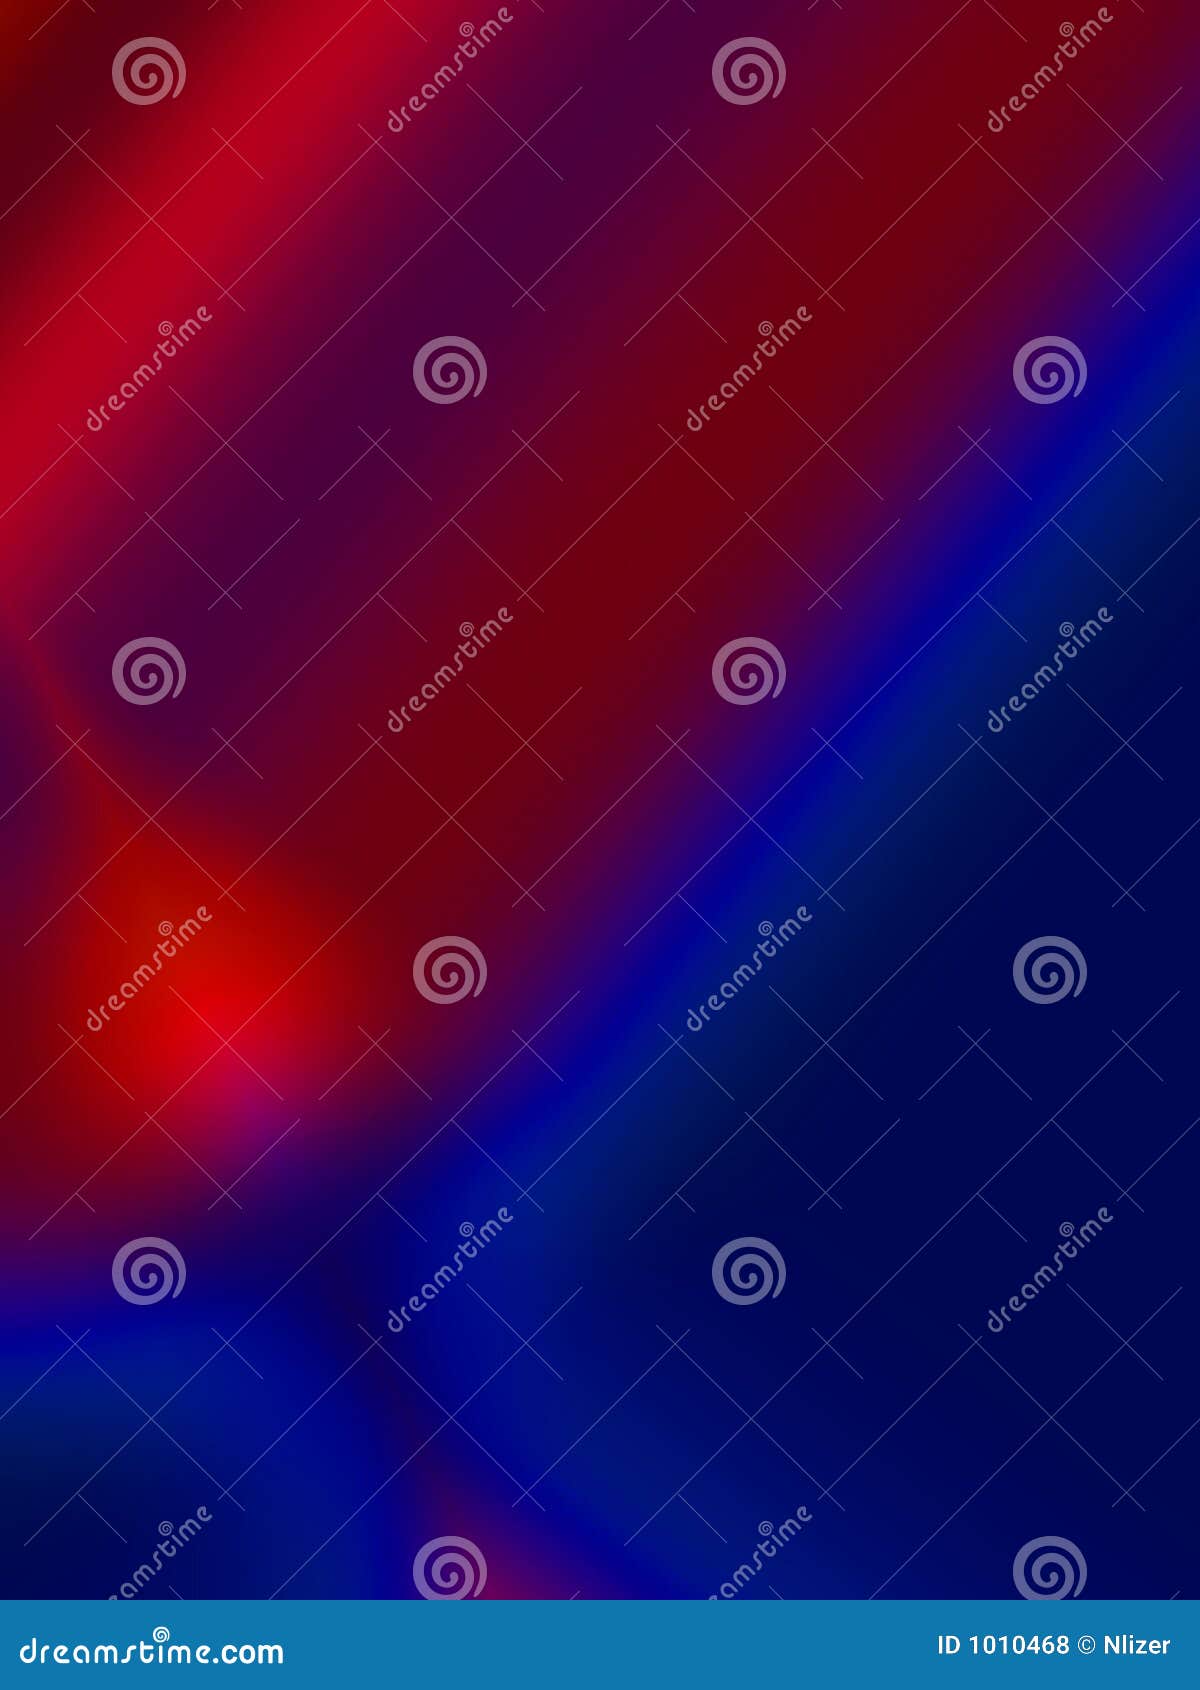 Red Blue Man Background Wallpaper Stock Illustration Illustration Of Business Graphic